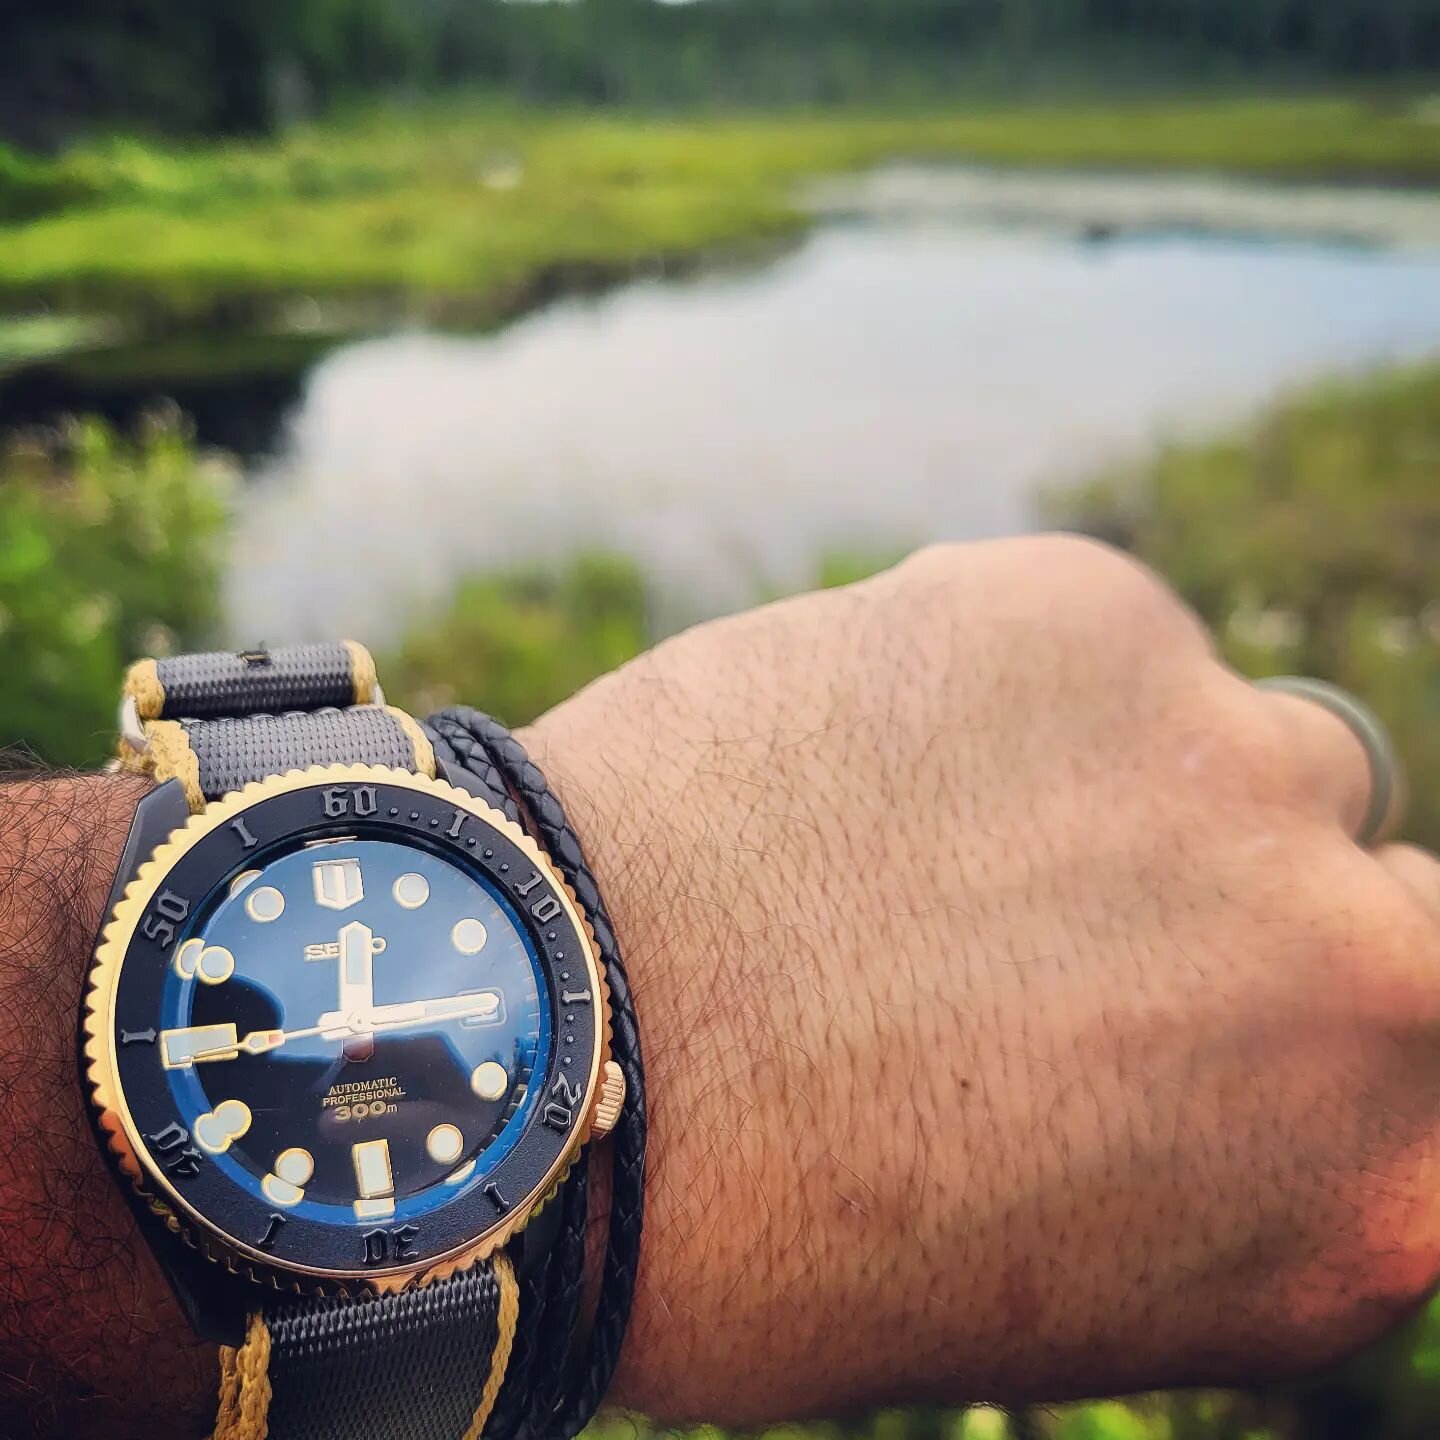 Took my custom Seiko skx007 mod out to the wilderness. Spent a week in @algonquin_pp and definitely put it through some paces with hikes, canoe rides and general outdoor camping activities.

This watch is not manufactured by Seiko

#watchaddicts #wat